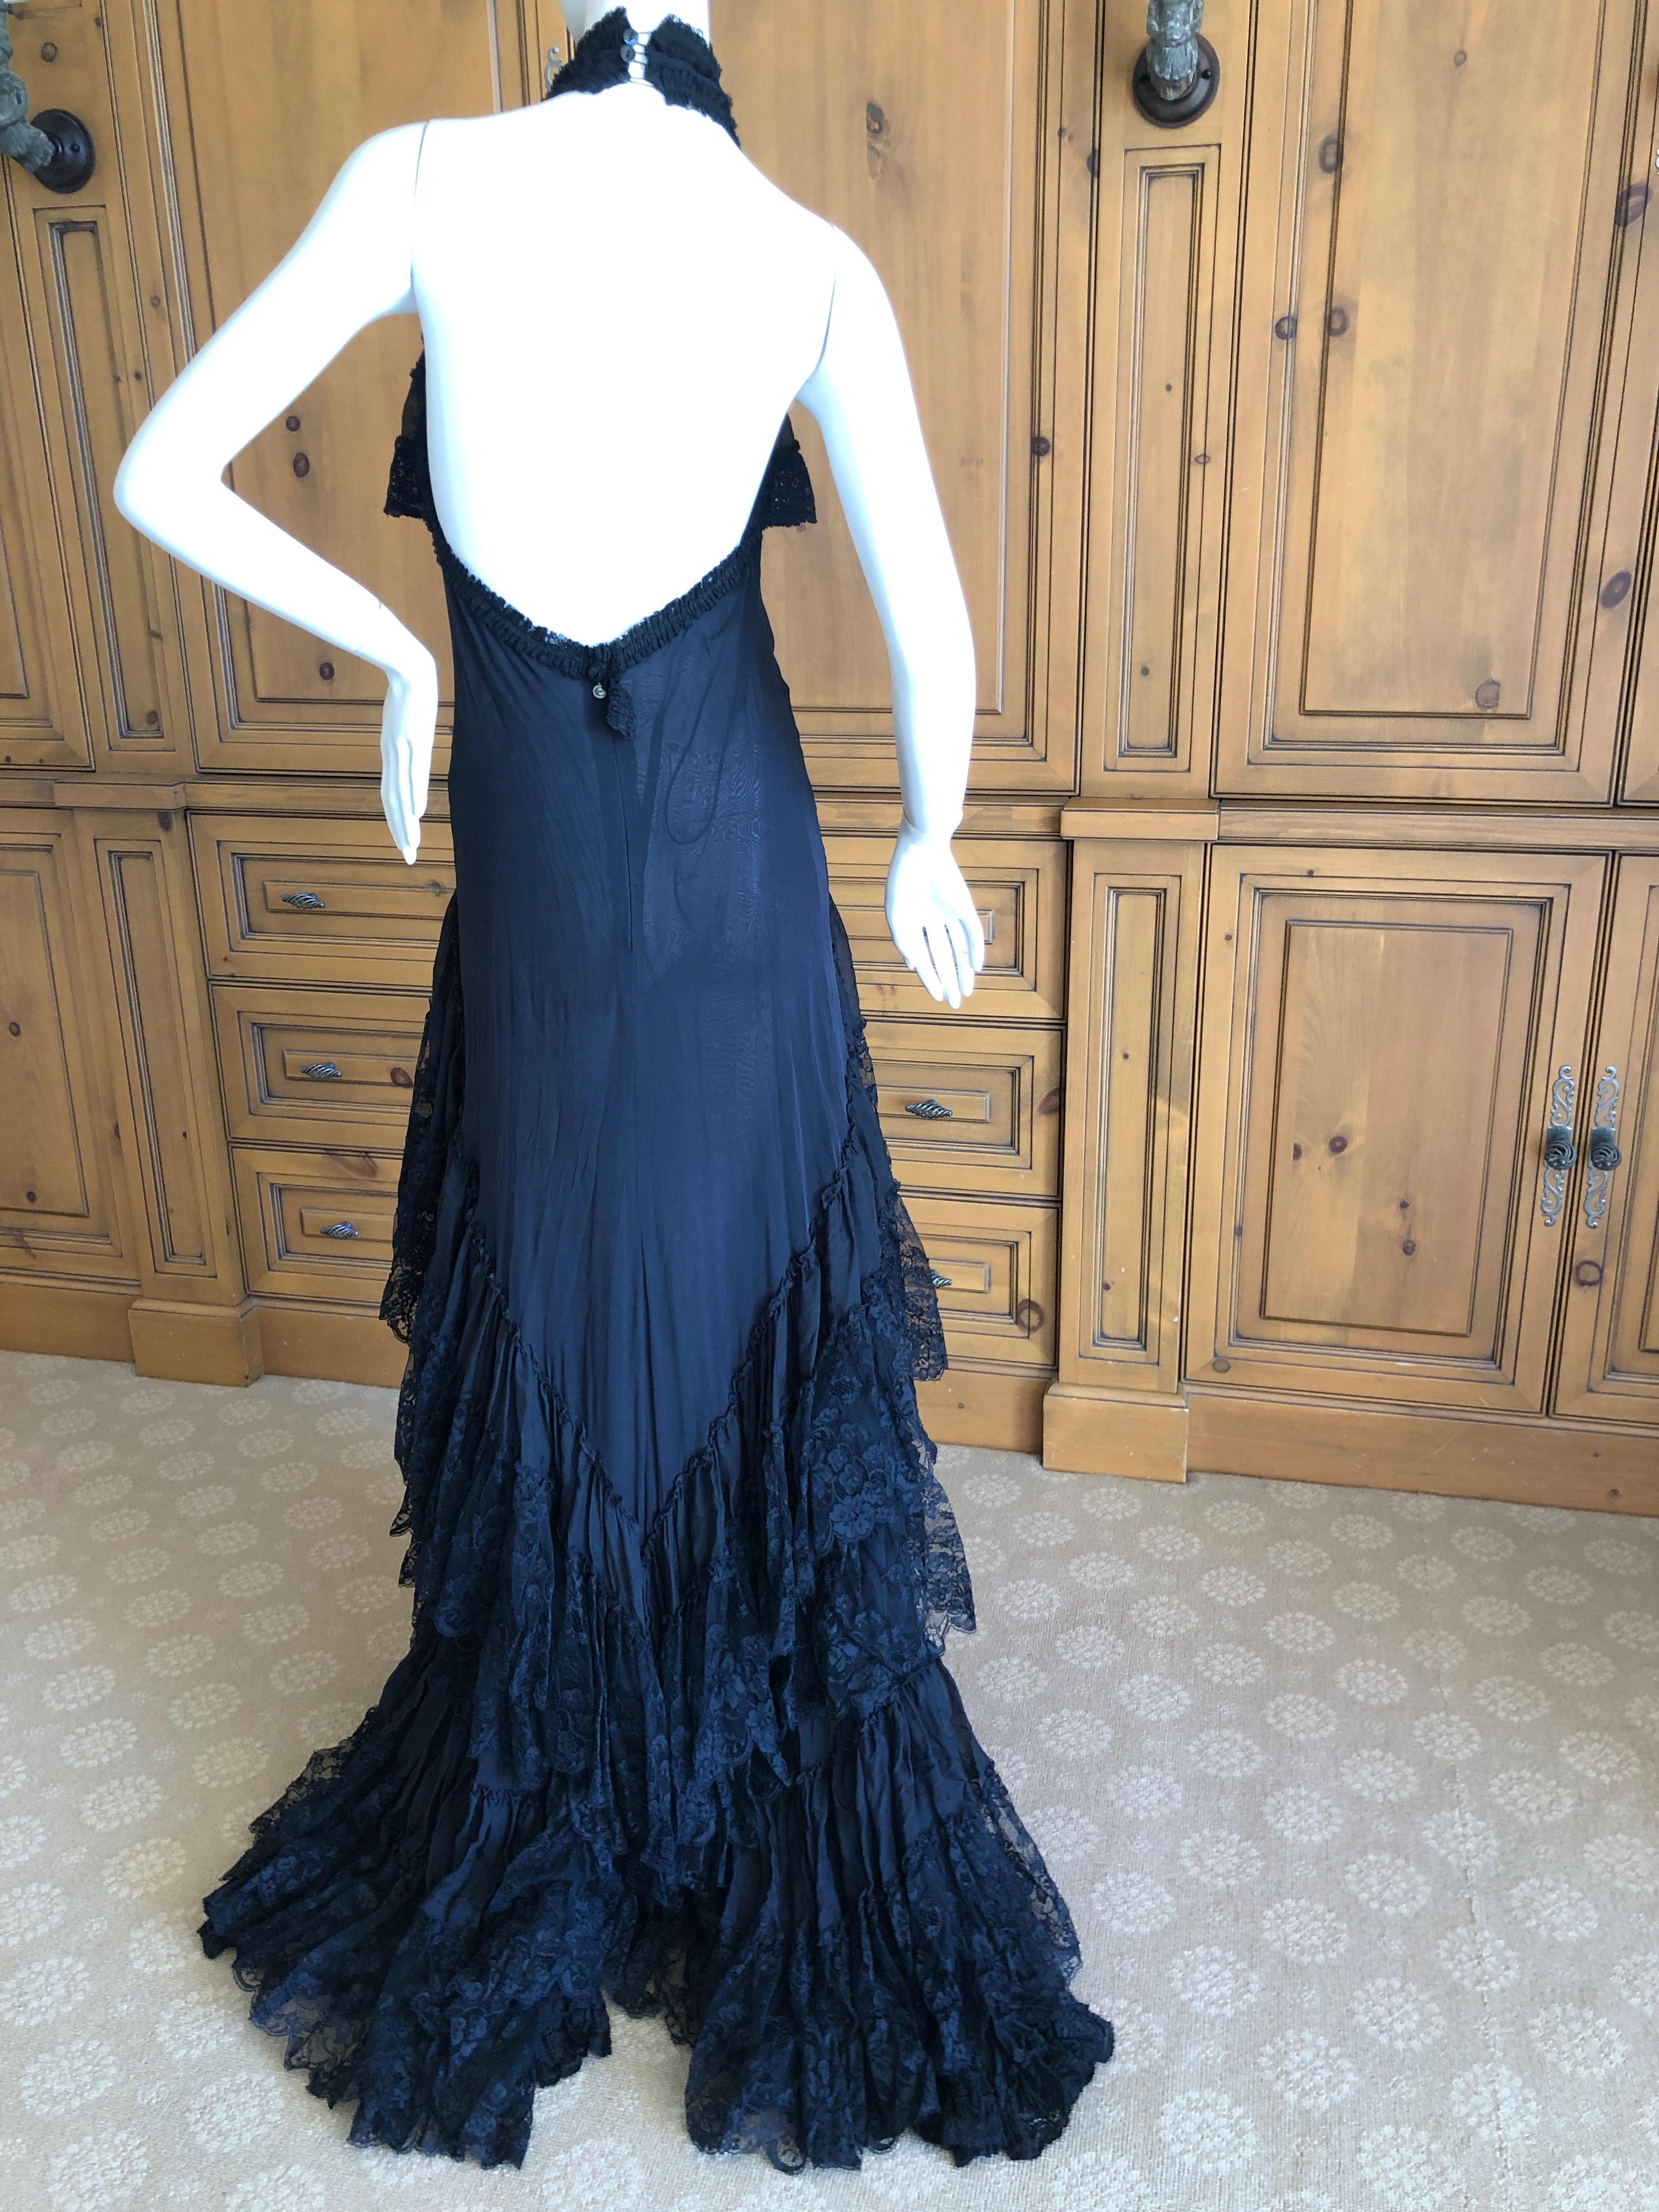 Roberto Cavalli for Just Cavalli Vintage Black Lace Layer Halter Dress.
So pretty
I show it with the skirt lining listed to show it sheer .
Zipper says Just Cavalli, labels are no longer on the dress
Size 8
 Bust 36